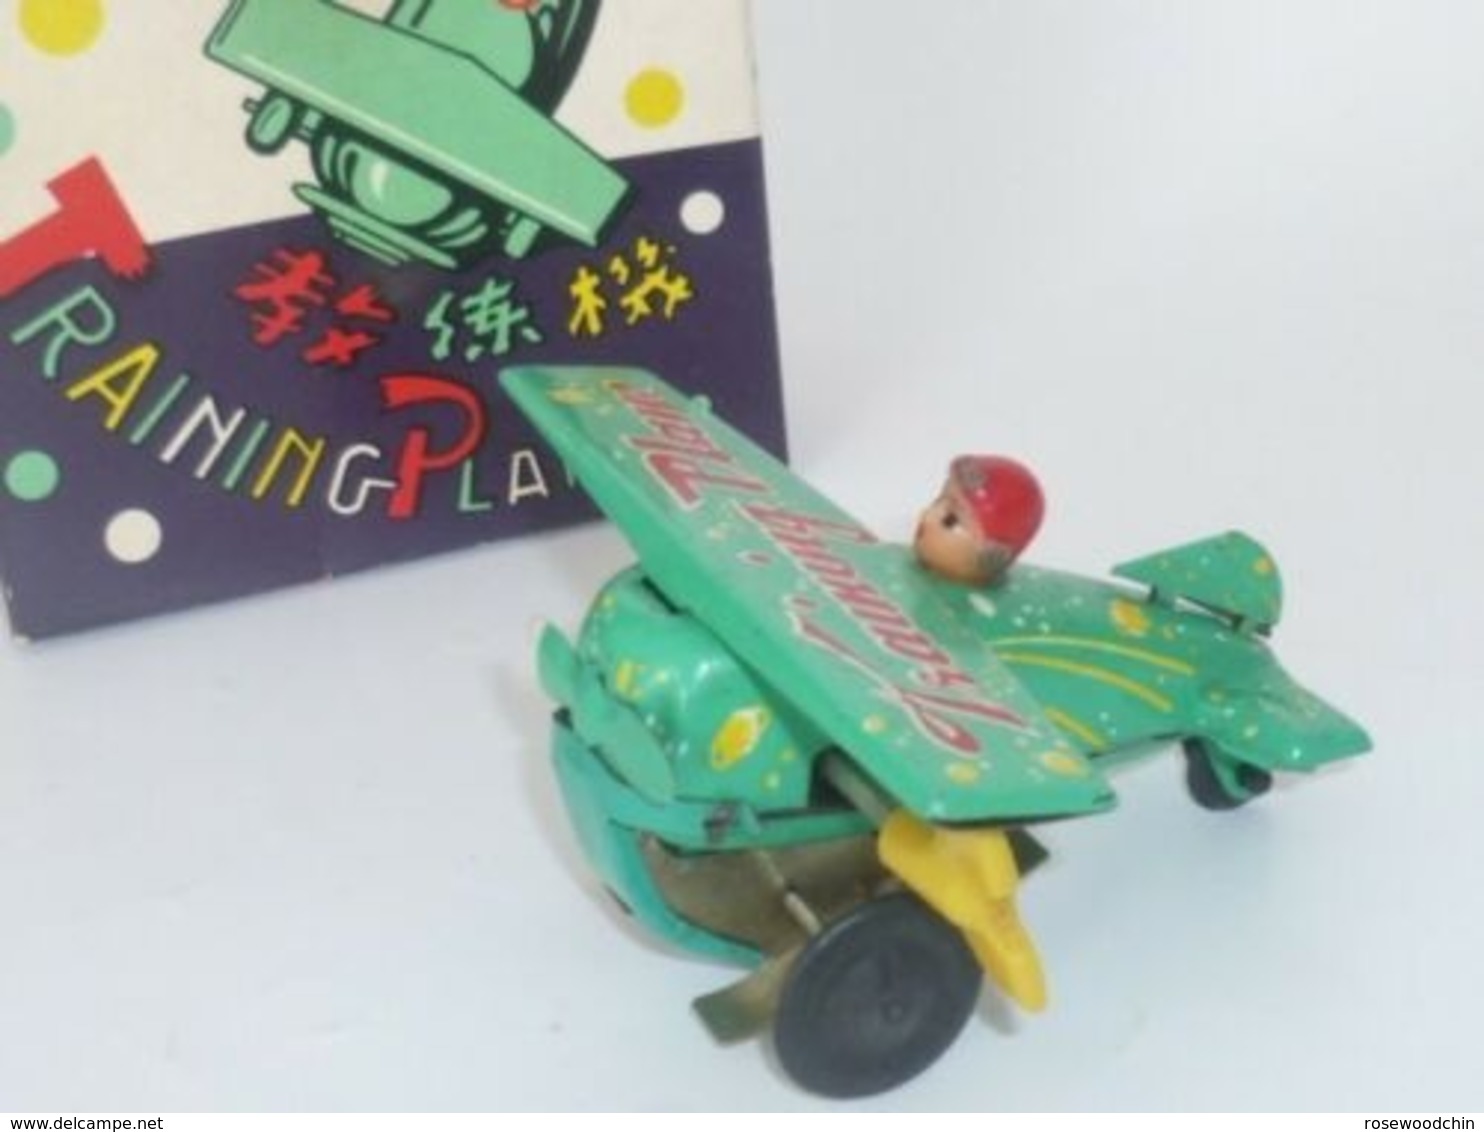 VINTAGE ! China 60s' Wind Up Tin Toy Training Plane With Box (MS 011) - Toy Memorabilia